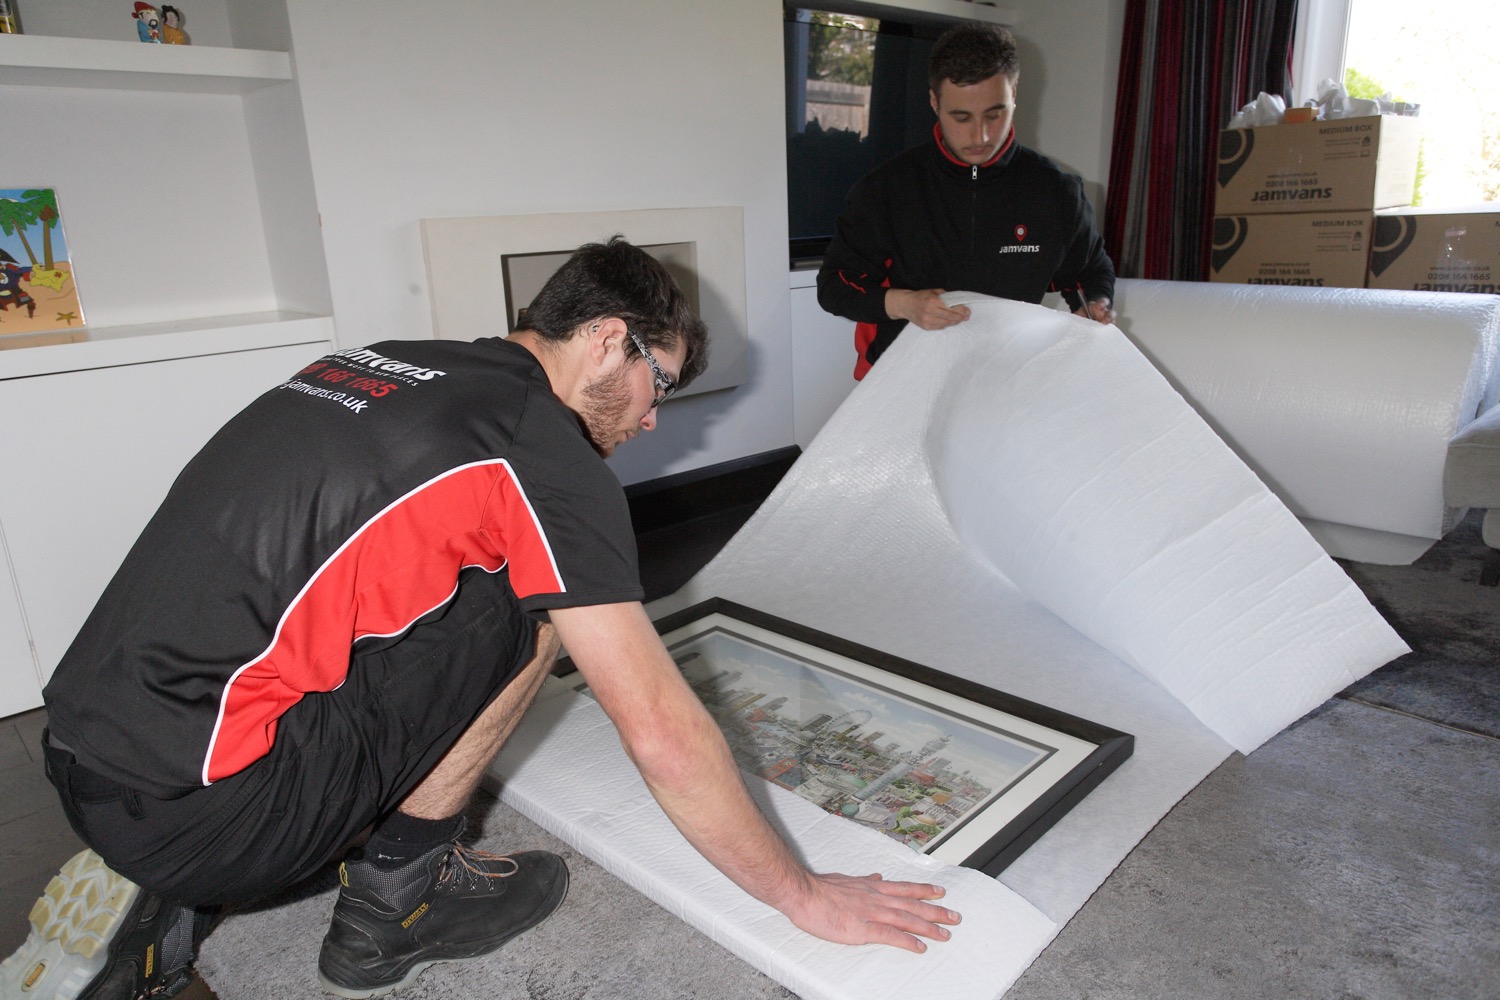 Removals man wrapping up a picture